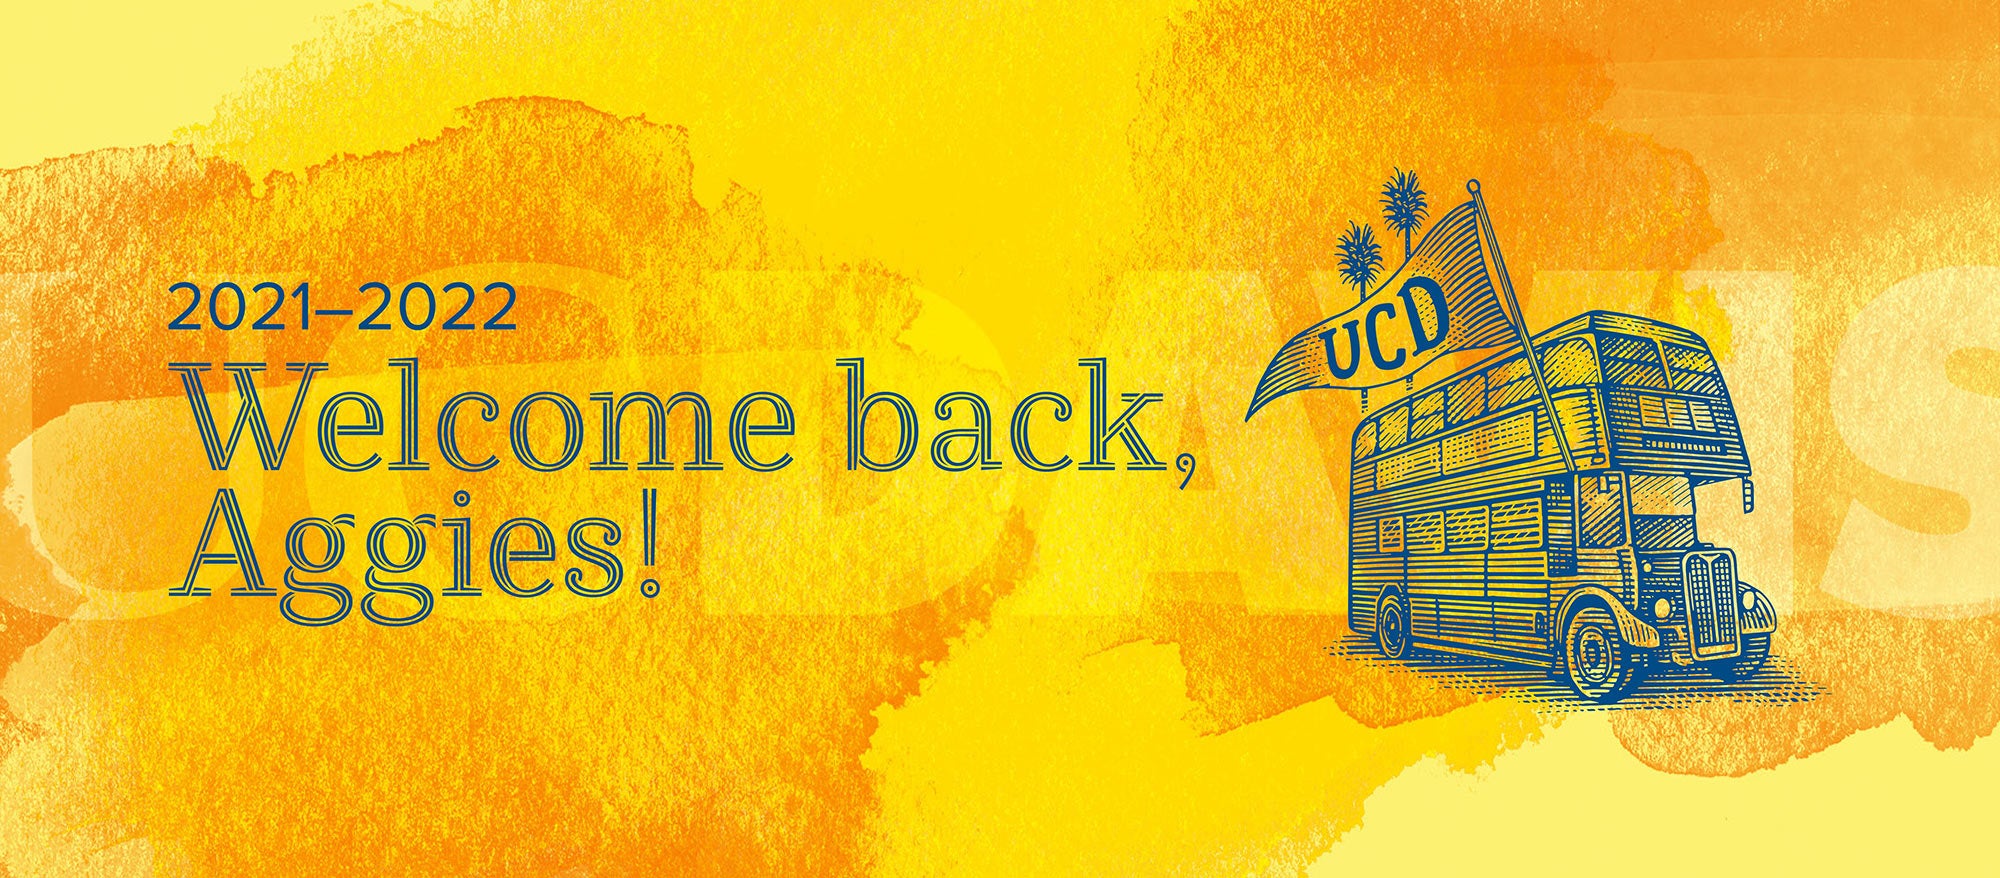 "Welcome back, Aggies" with line drawaing of double-decker bus, from campus poster calendar